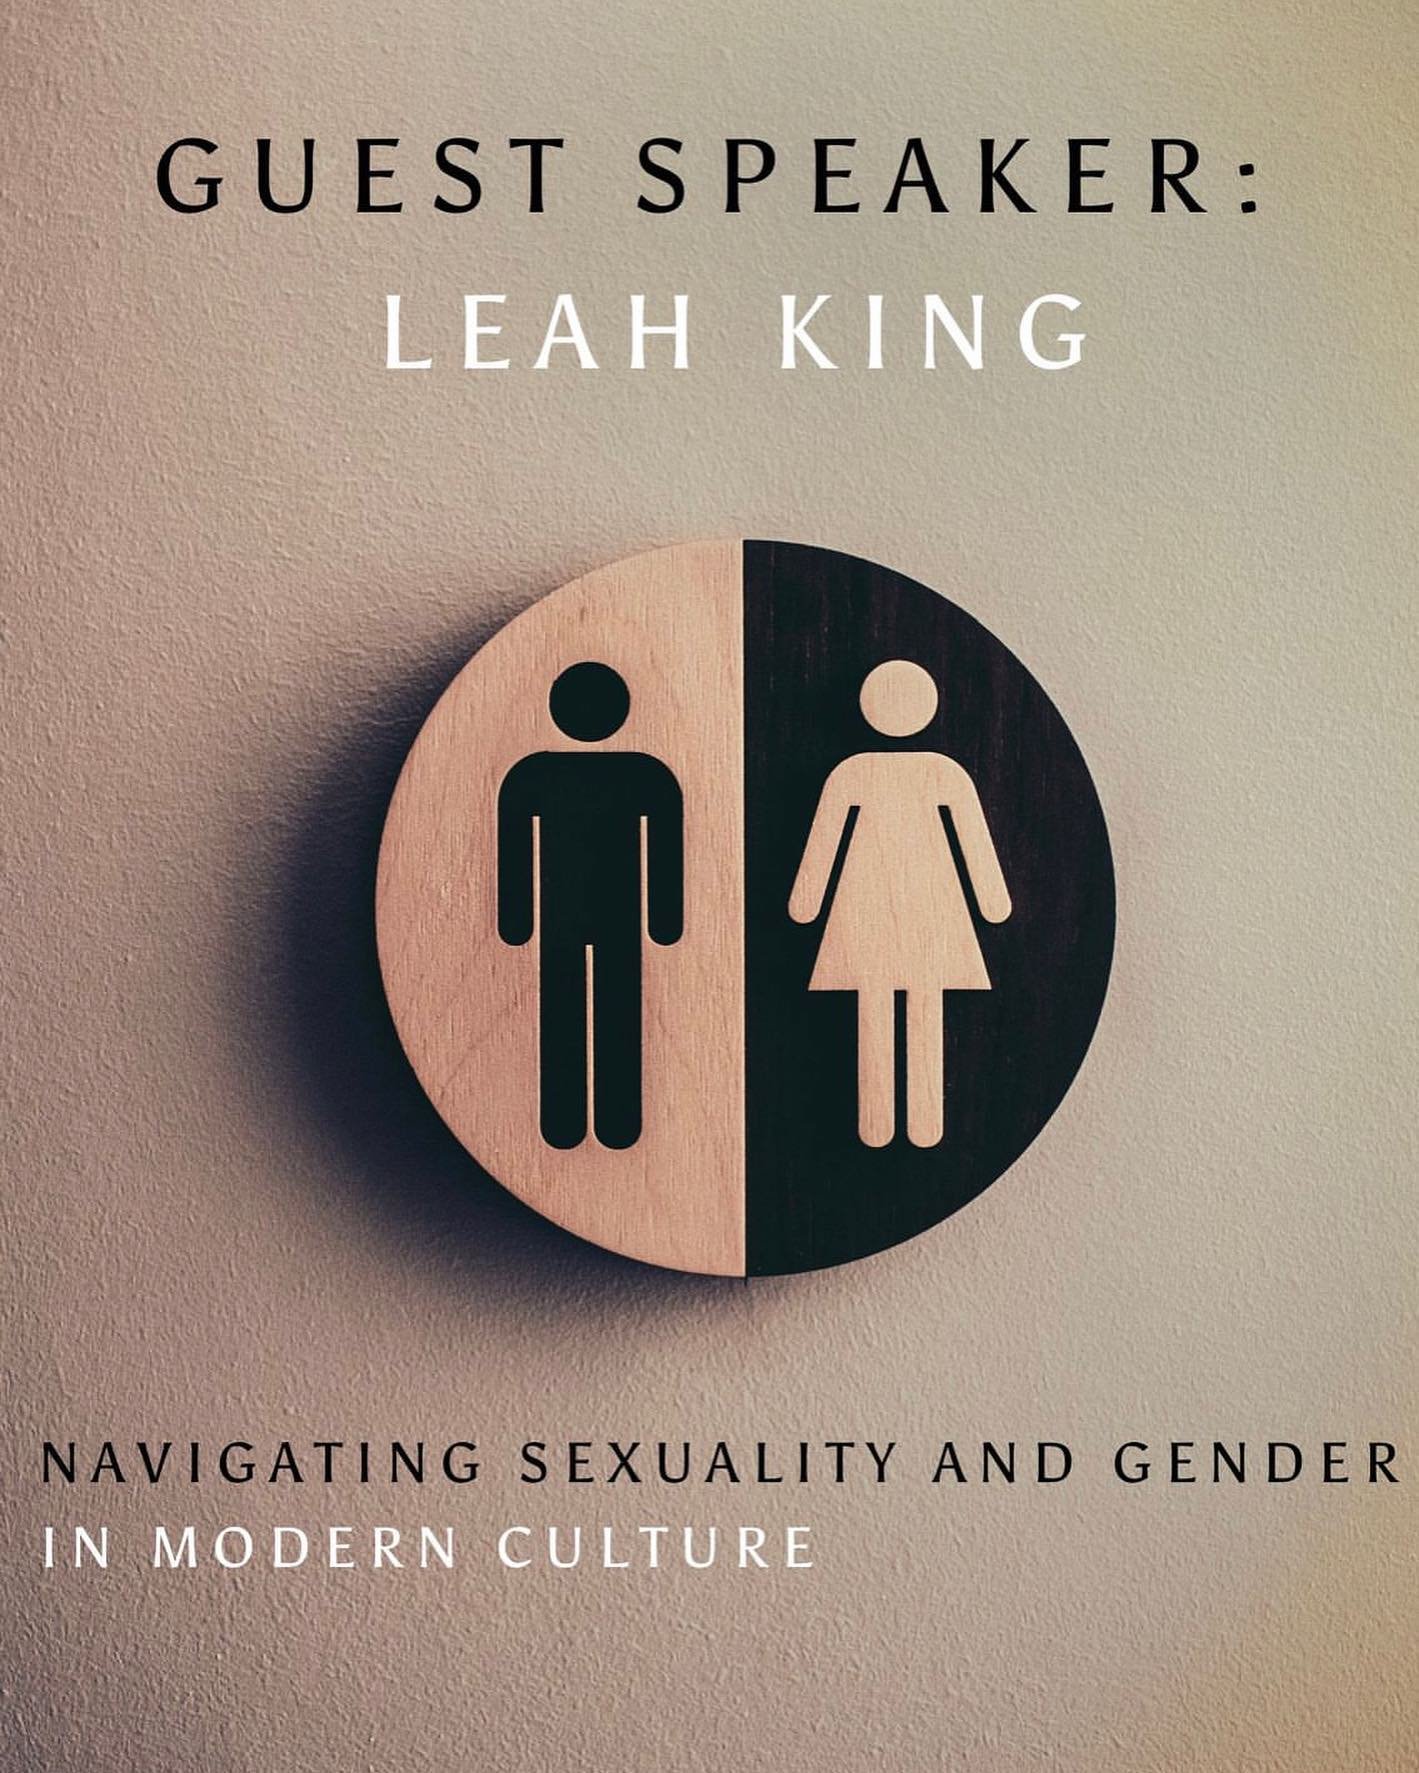 TOMORROW NIGHT! 

Special speaker Leah King will be speaking tomorrow at youth group providing gospel-centered training and support to the local church in navigating conversations about sexuality with truth, grace, and compassion. As well as speak to